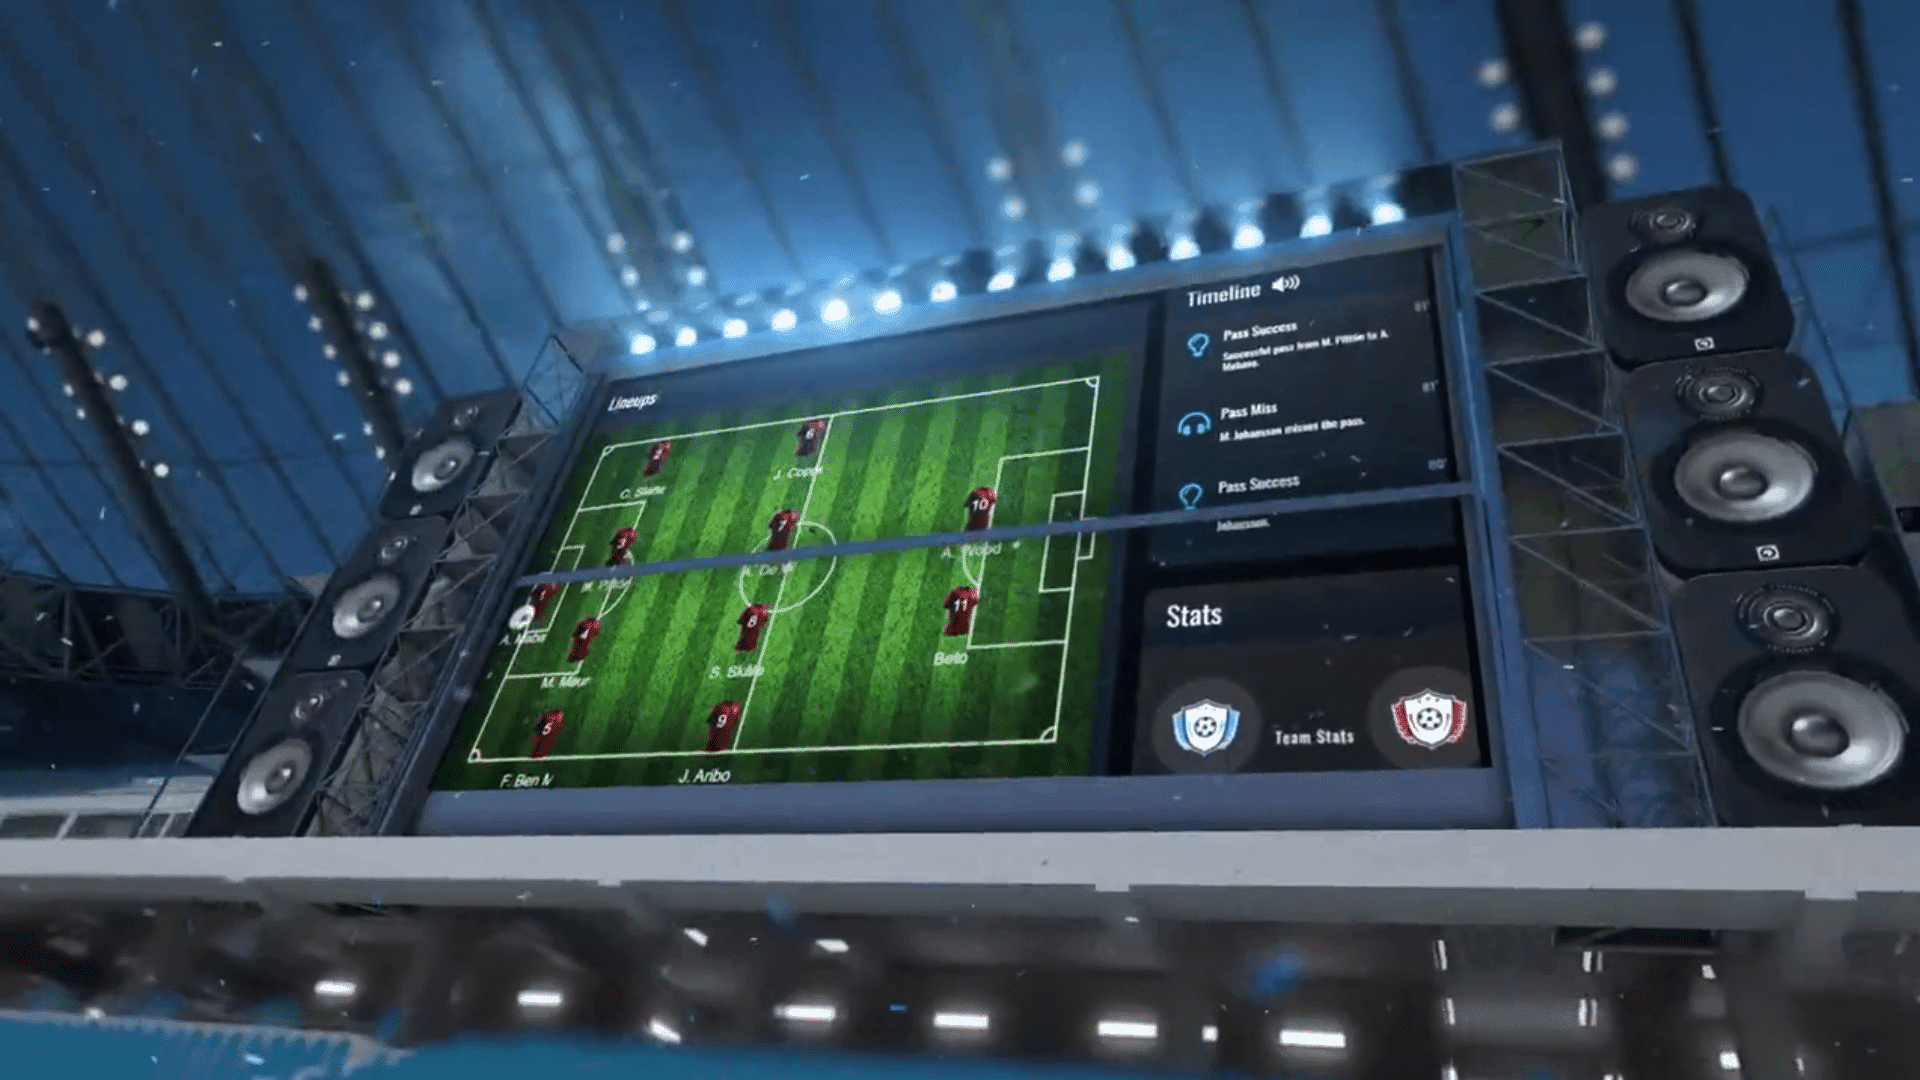 NFT Soccer Games offers a digital soccer experience on the Avalanche Contract Chain, allowing you to possess distinctive ERC-721 tokens.